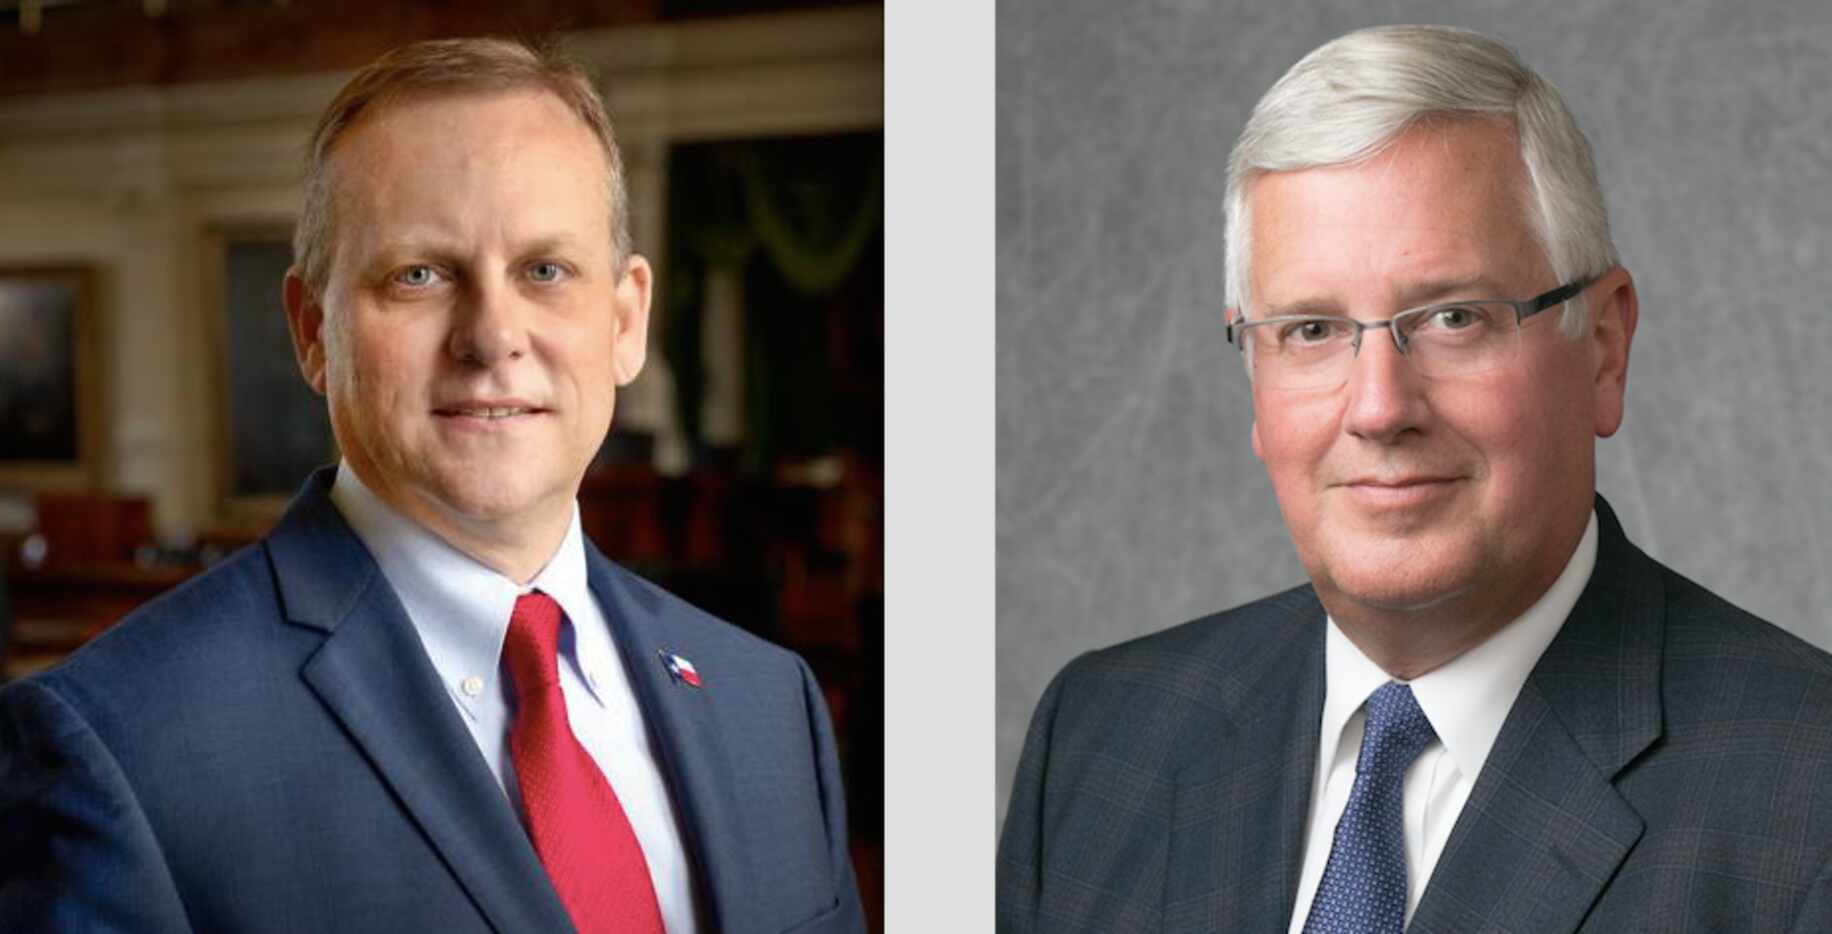 Scott Milder (left) and Mike Collier are hoping to unseat Lt. Gov. Dan Patrick. Milder, a...